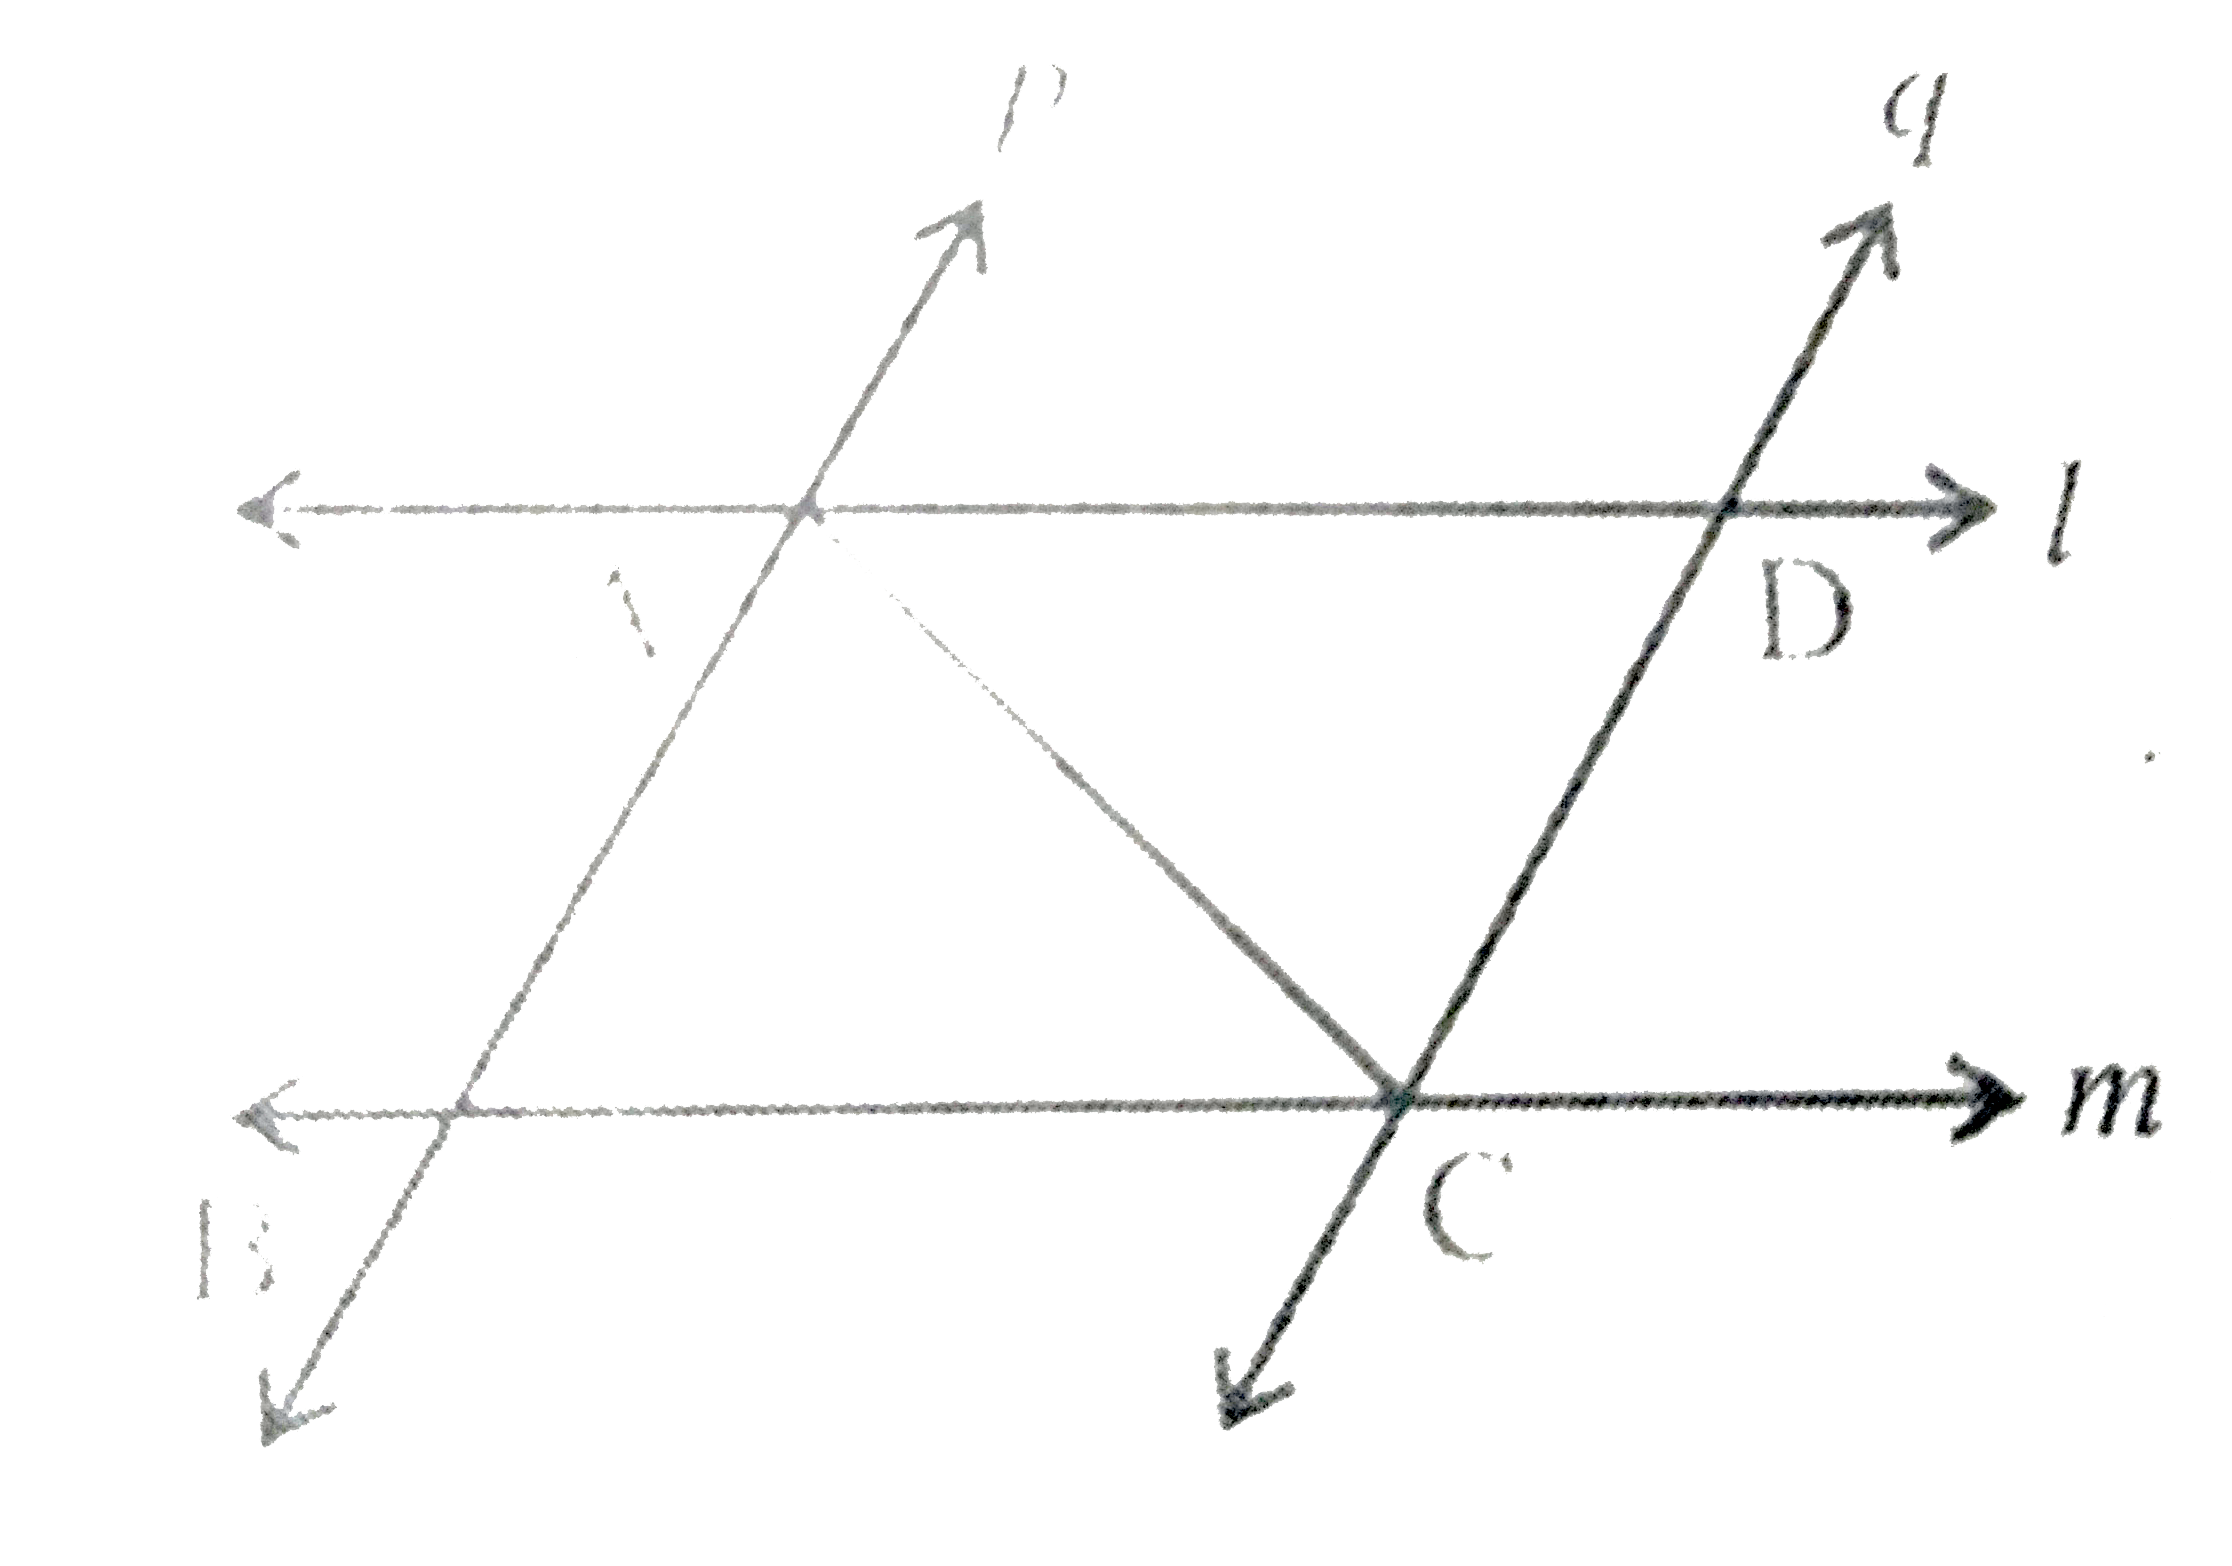 l and  m are two parallel lines intersected by another pair of parallel lines  p and q (see Fig. 7.19). Show that DeltaA B C~=DeltaC D A.